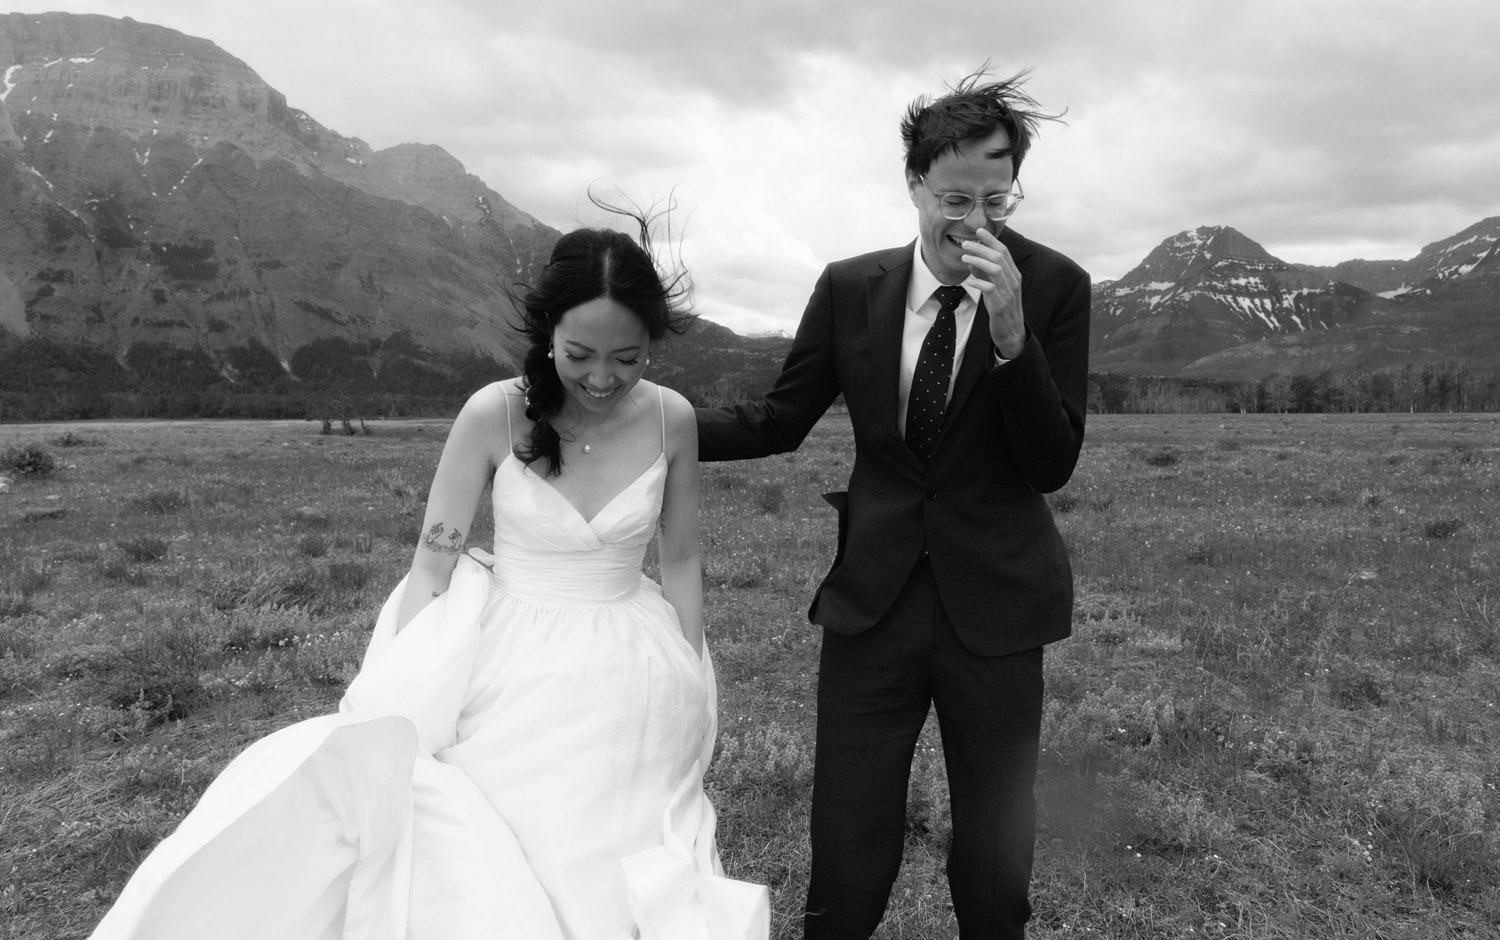 Windy wedding portraiture in the lupine field in Waterton Lakes National Park